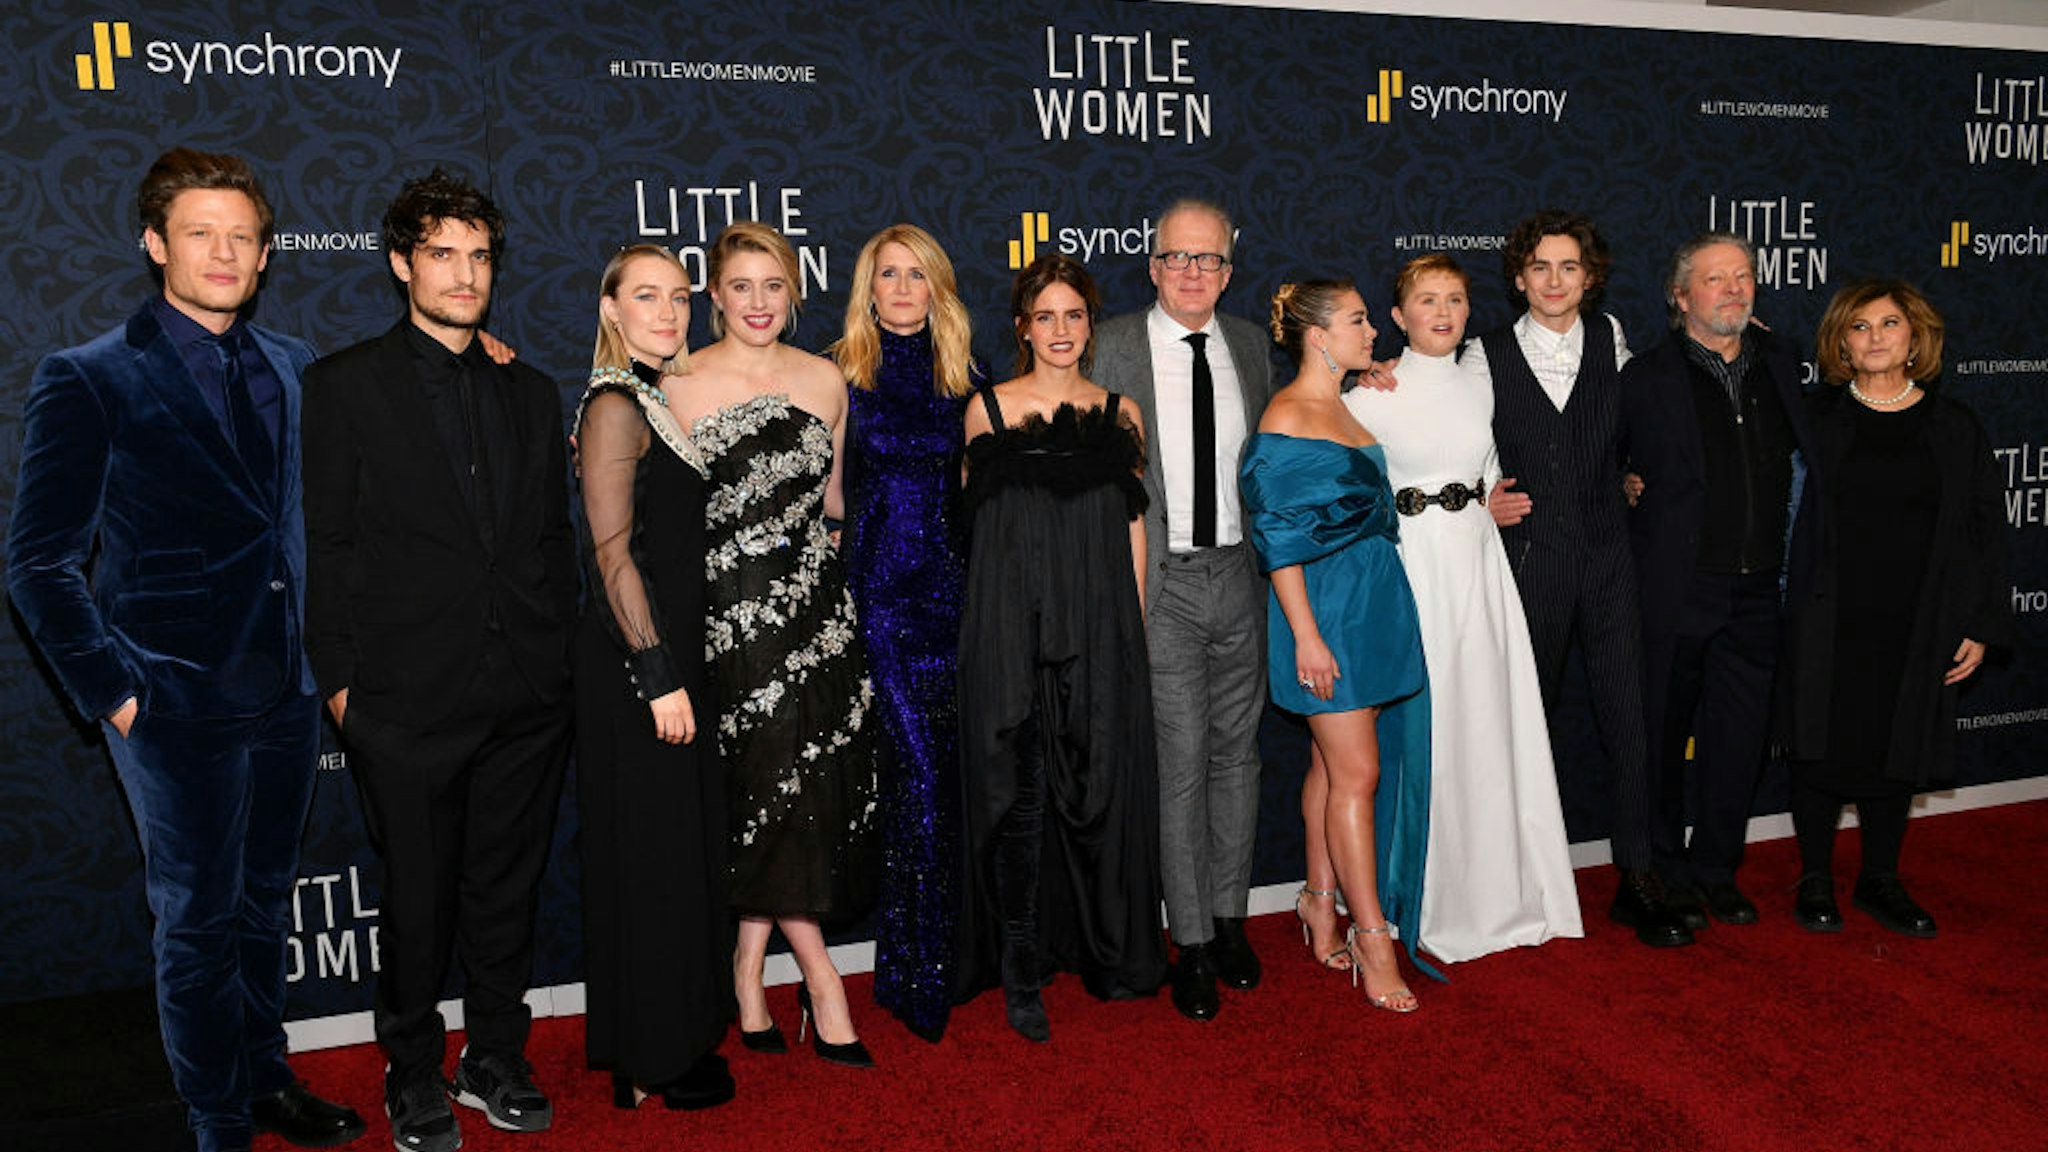 Hadley Robinson, James Norton, Louis Garrel, Saoirse Ronan, Laura Dern, Emma Watson, Tracy Letts, Florence Pugh, Eliza Scanlen, Chris Cooper and producer Amy Pascal attend the "Little Women" World Premiere at Museum of Modern Art on December 07, 2019 in New York City.